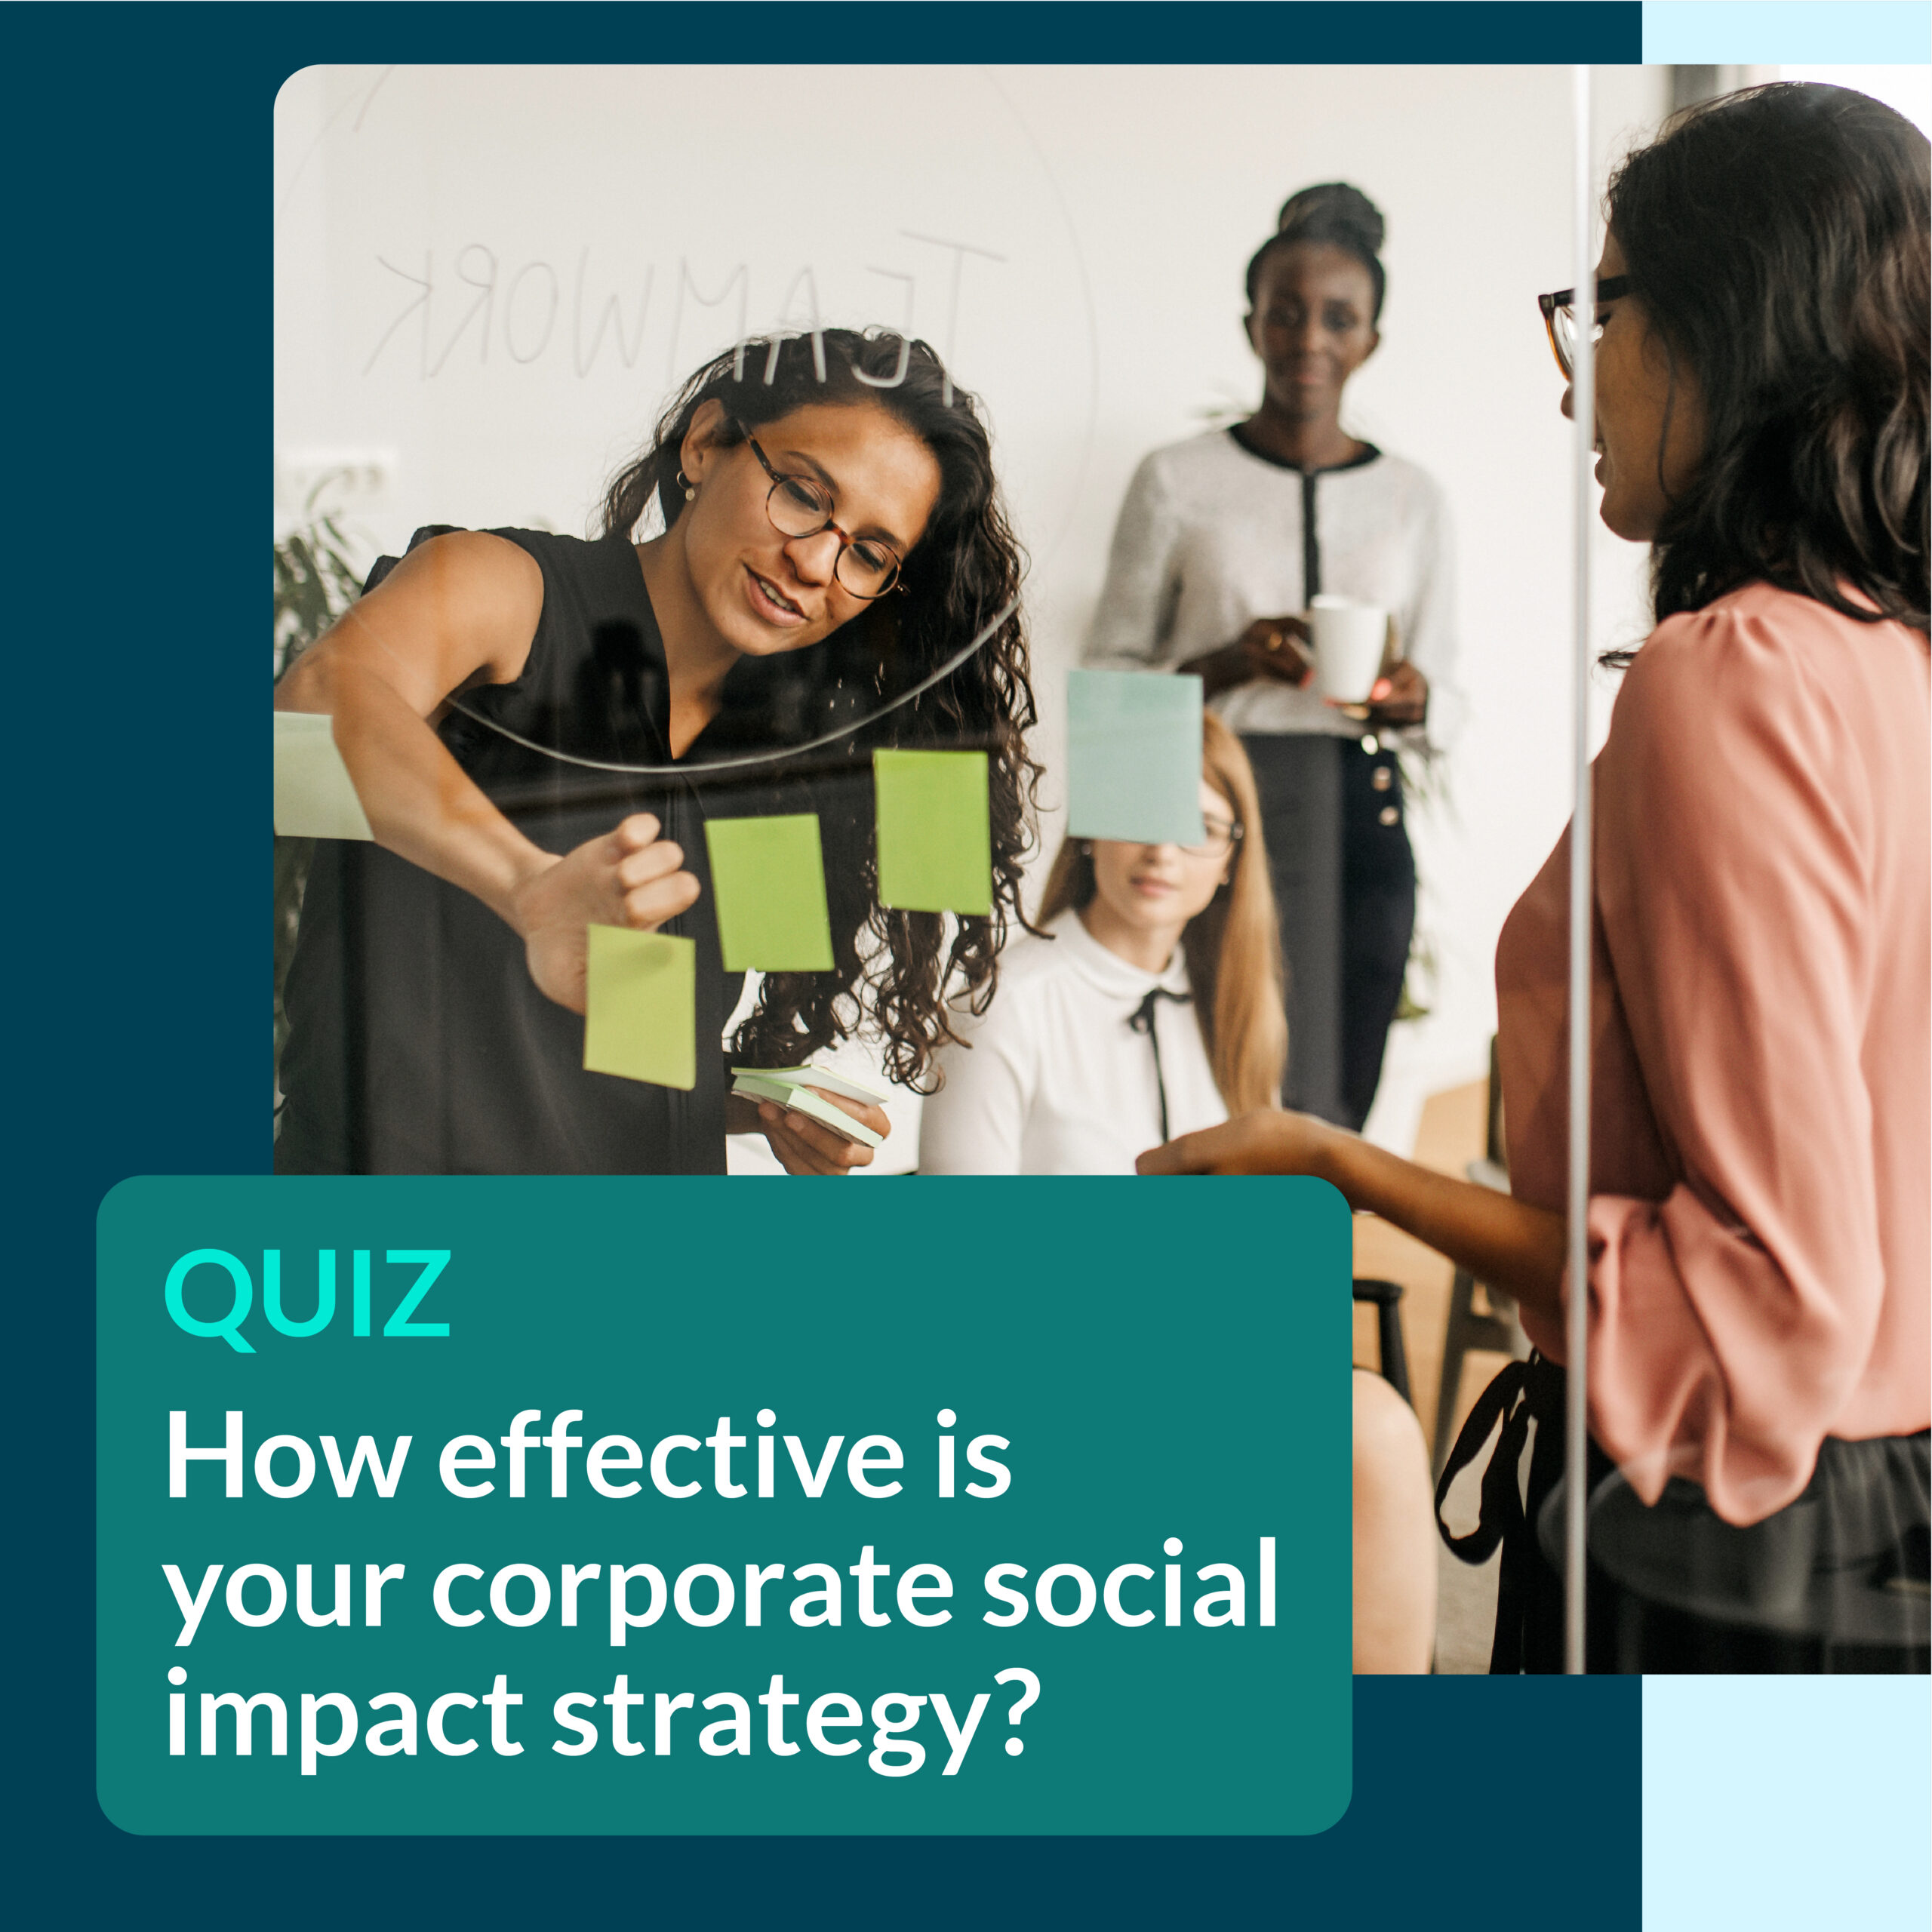 QUIZ: How effective is your corporate social impact strategy?